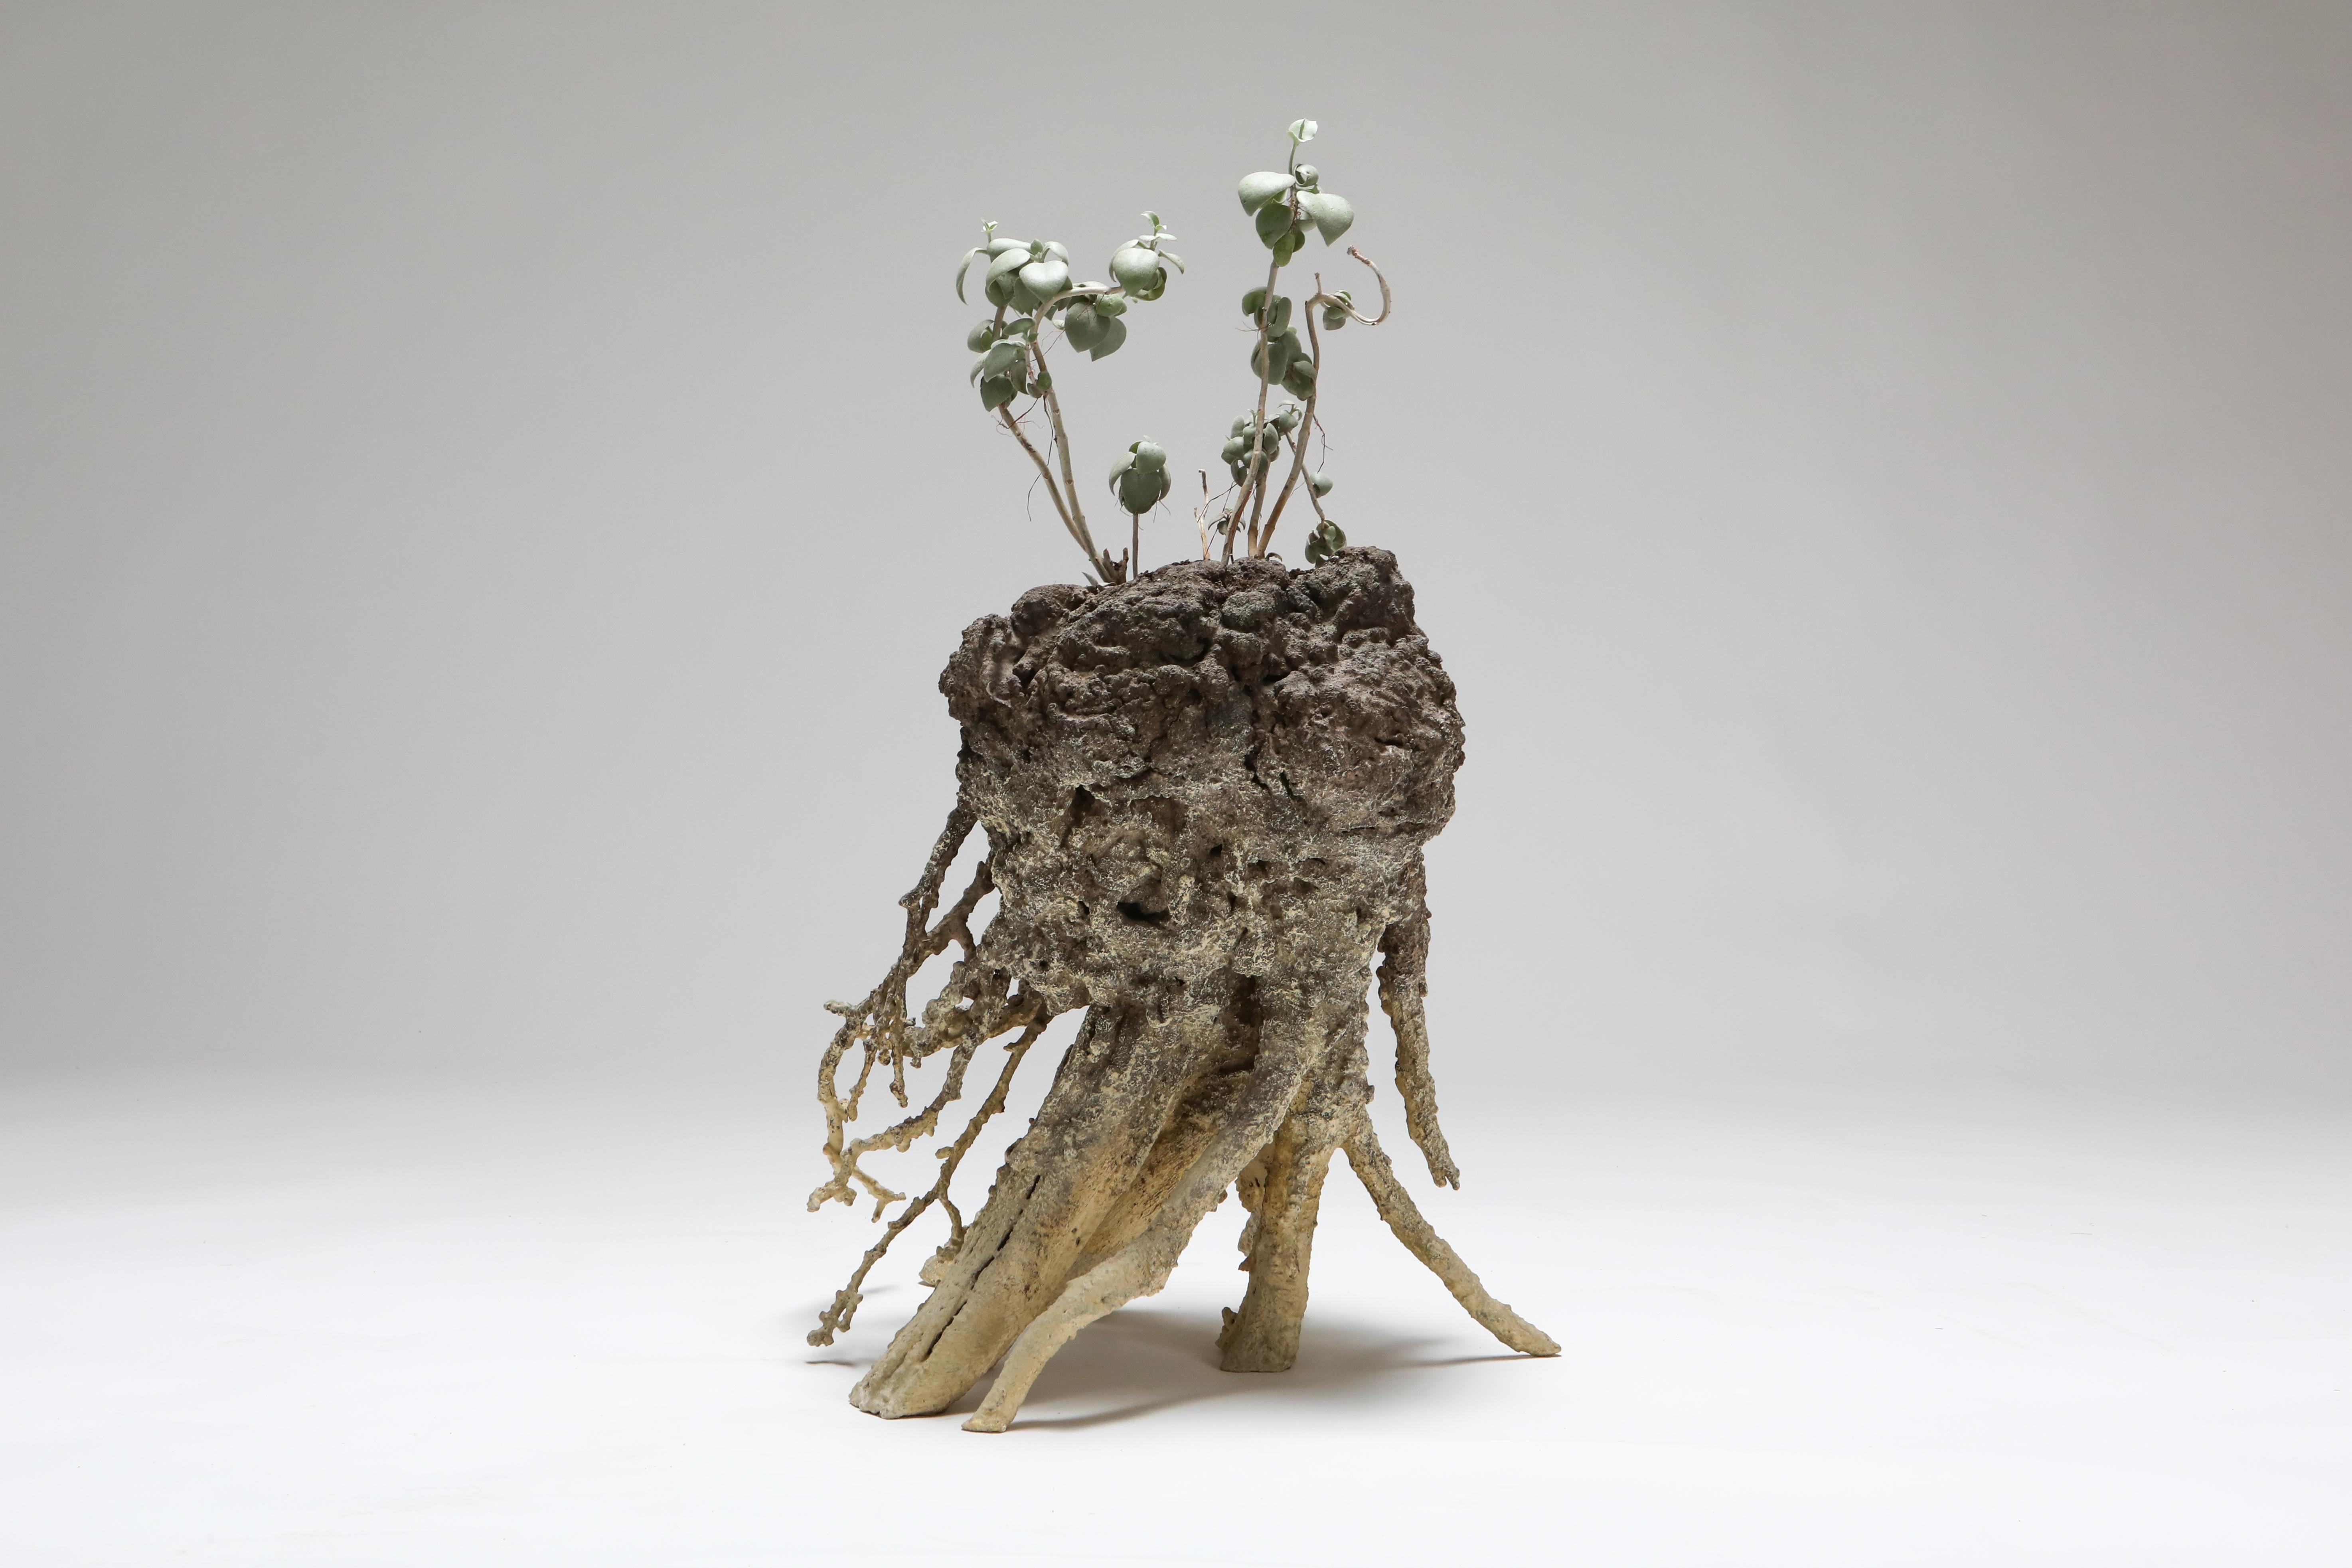 Contemporary planters / plant, touche-touche, France, 2020.

Mnetonimic Pneumatophres II is a contemporary functional art object created by the duo touche-touche. The one of a kind item was part of the solo exhibition in Everyday Gallery named